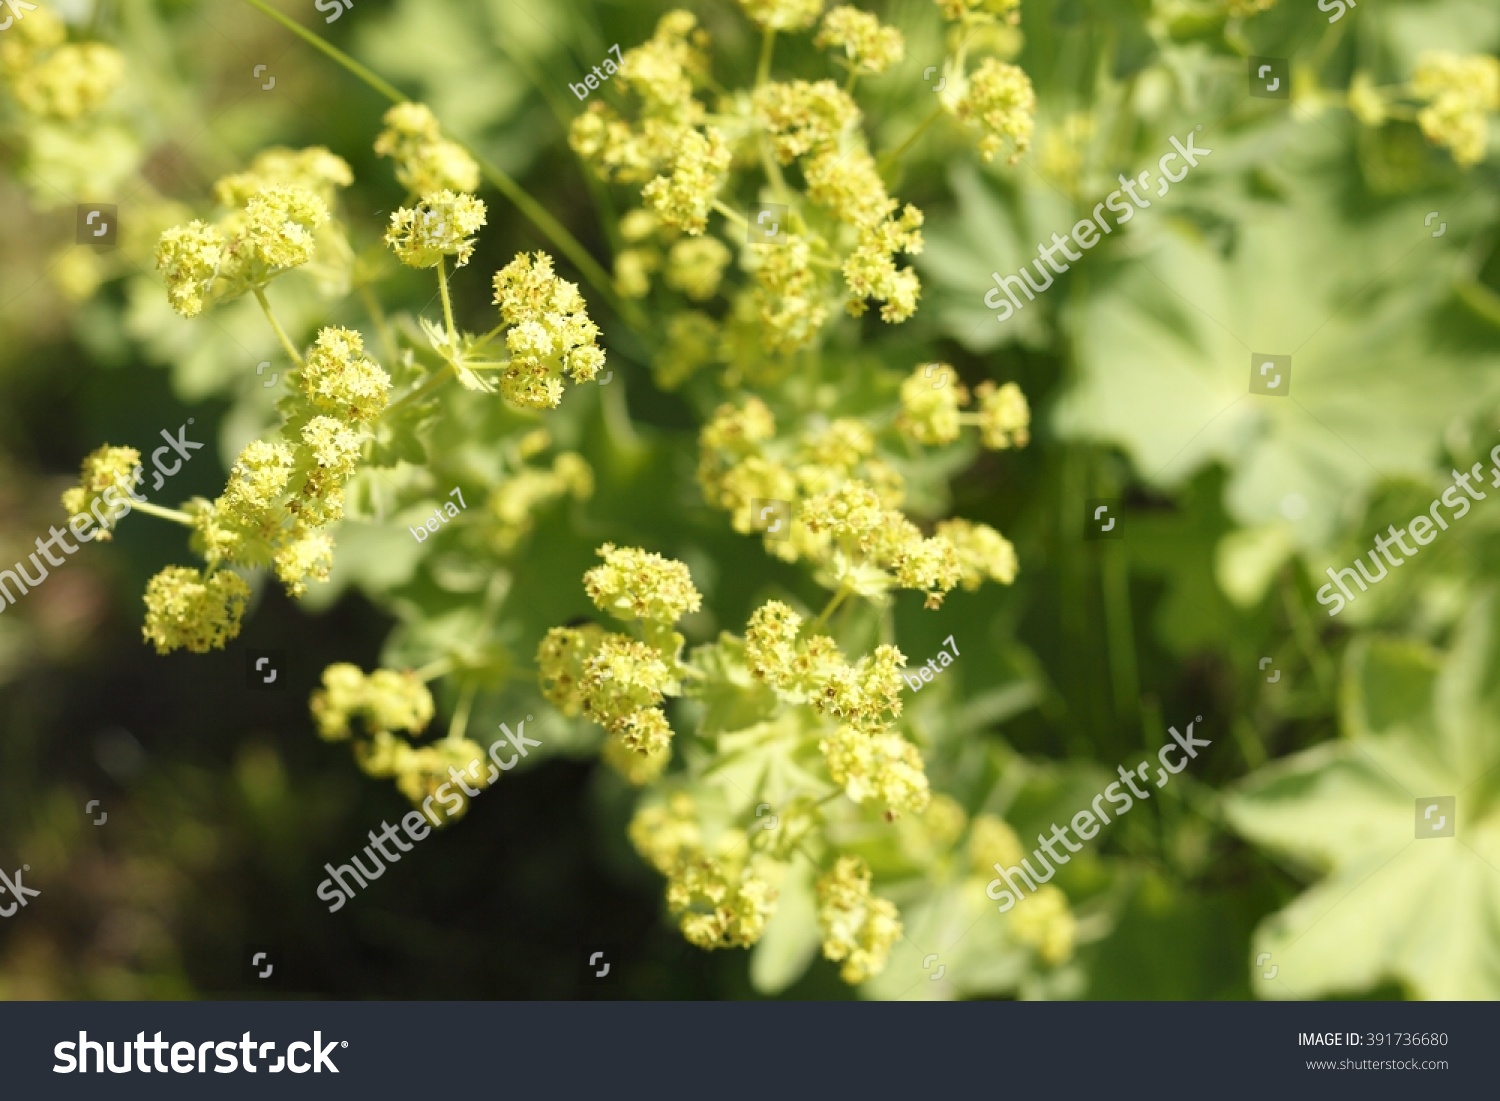 Common lady's mantle in garden #391736680